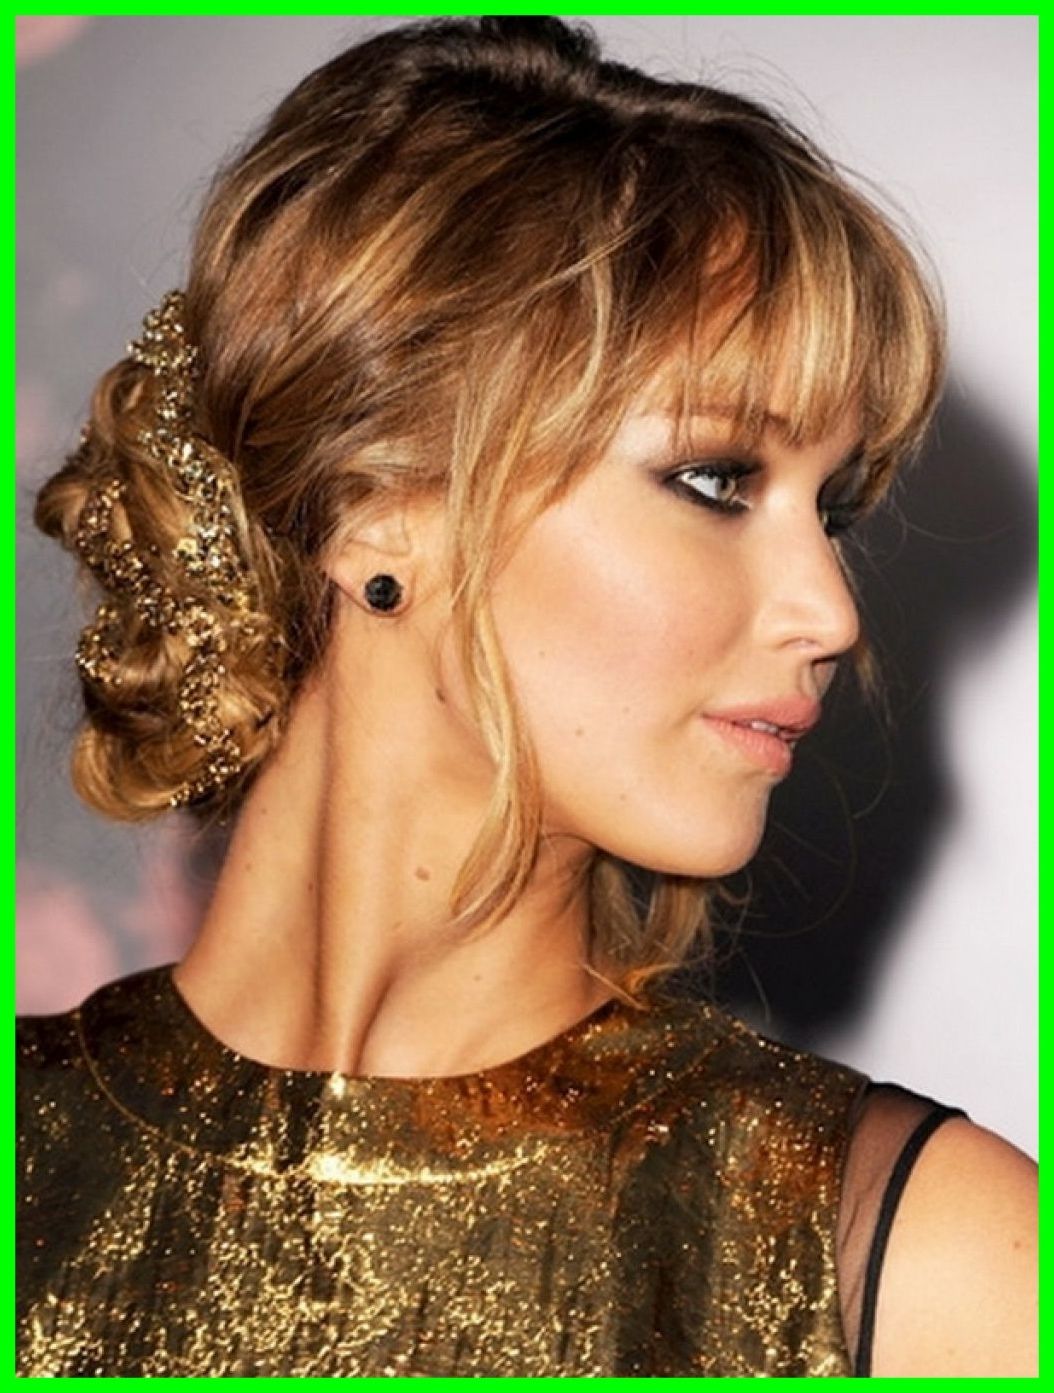 Most Current Wedding Guest Hairstyles For Medium Length Hair With Fringe Pertaining To Inspiring Fairy Hair Layer Also Medium Length Wedding Hairstyles Pic (View 4 of 15)